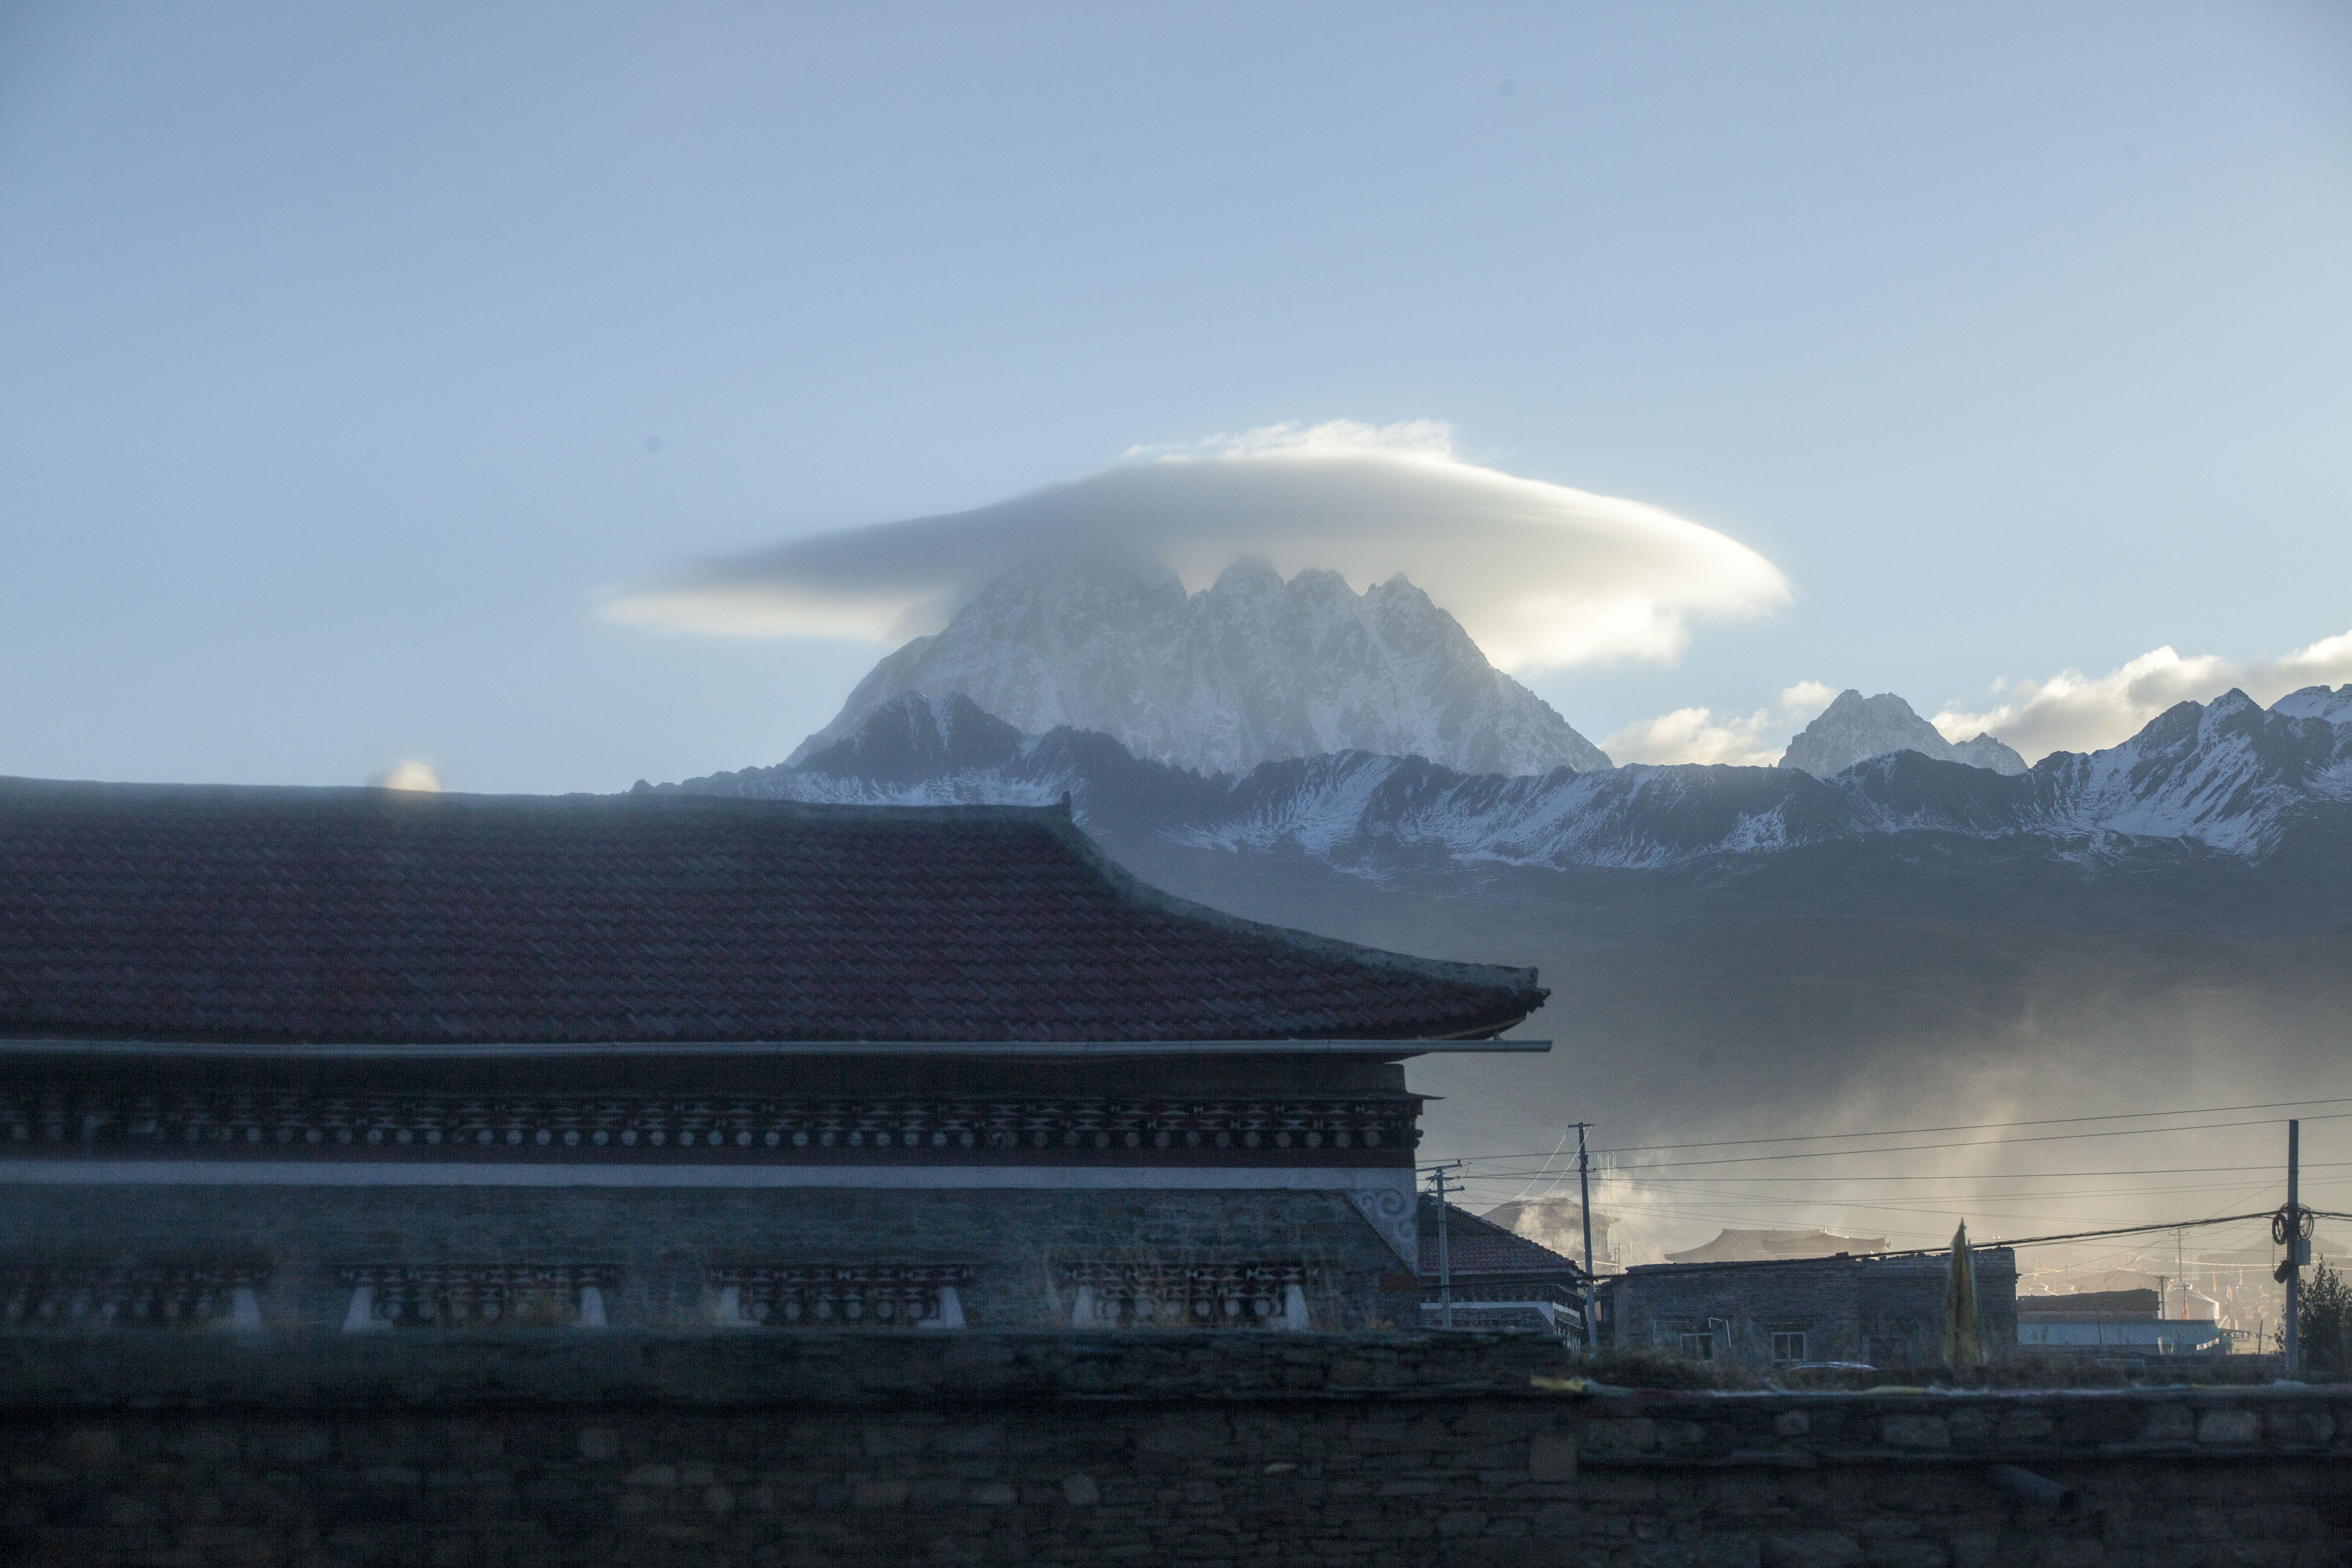 Lenticular clouds add mystery to Yala Mountains in Sichuan